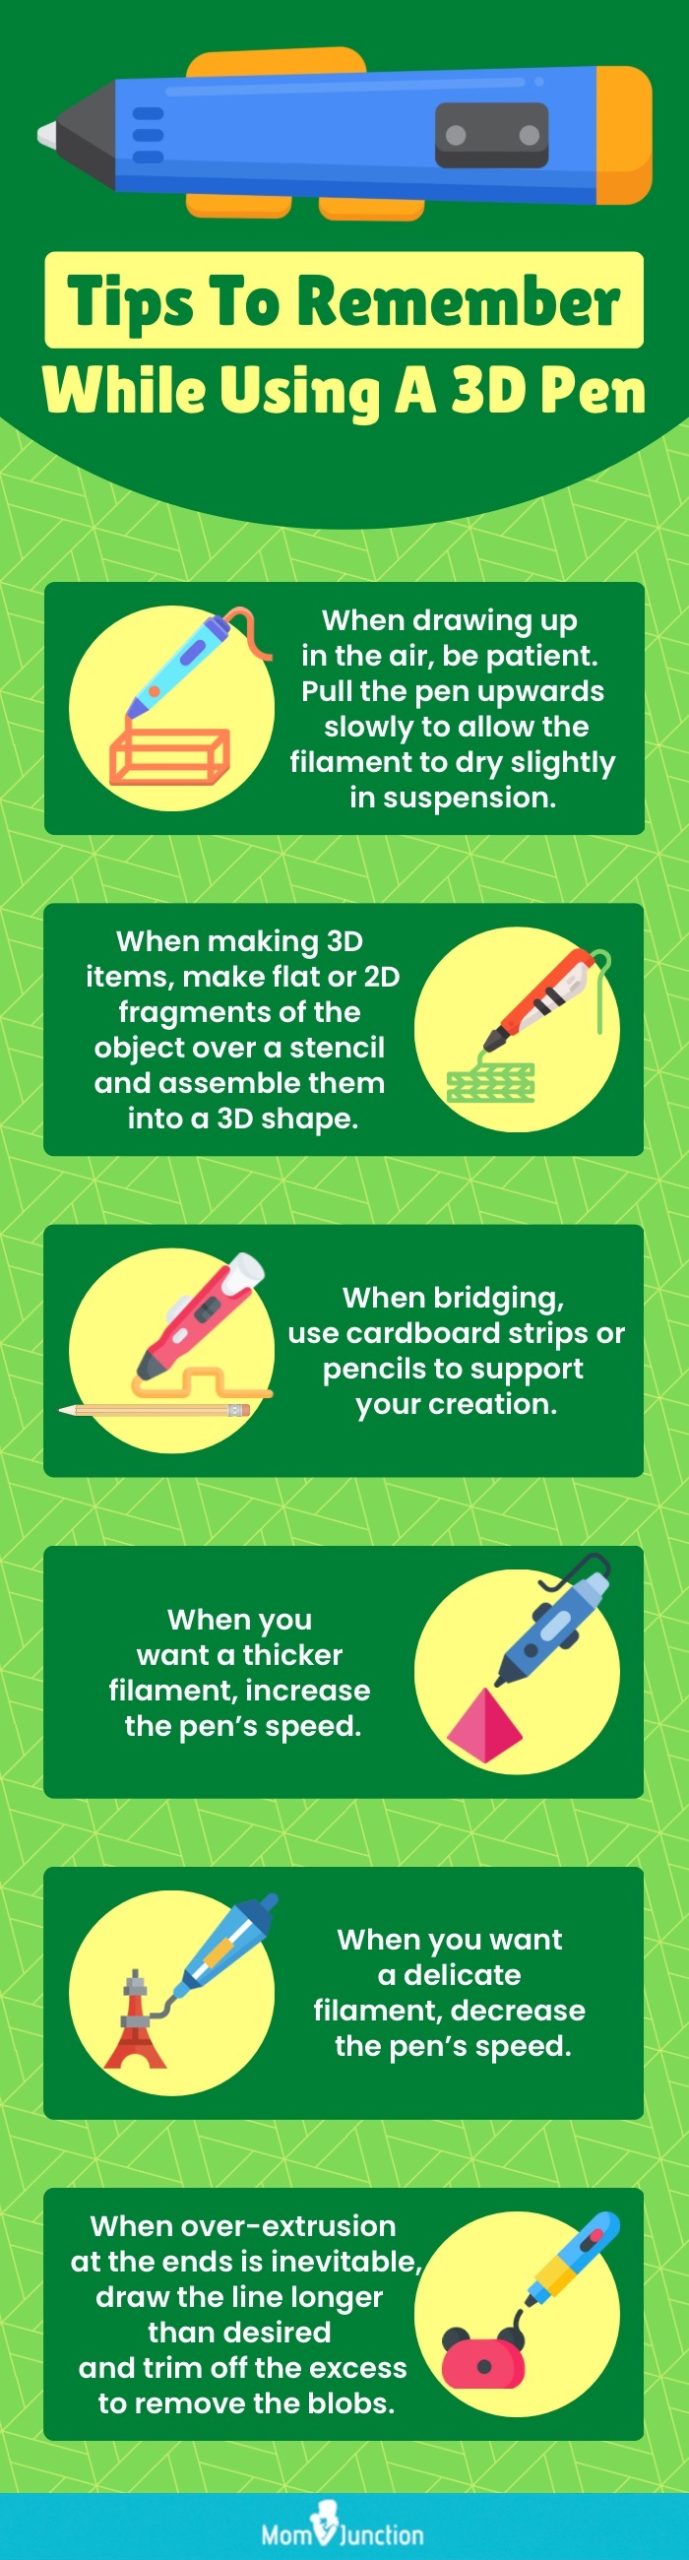 Tips To Remember While Using A 3D Pen (infographic)